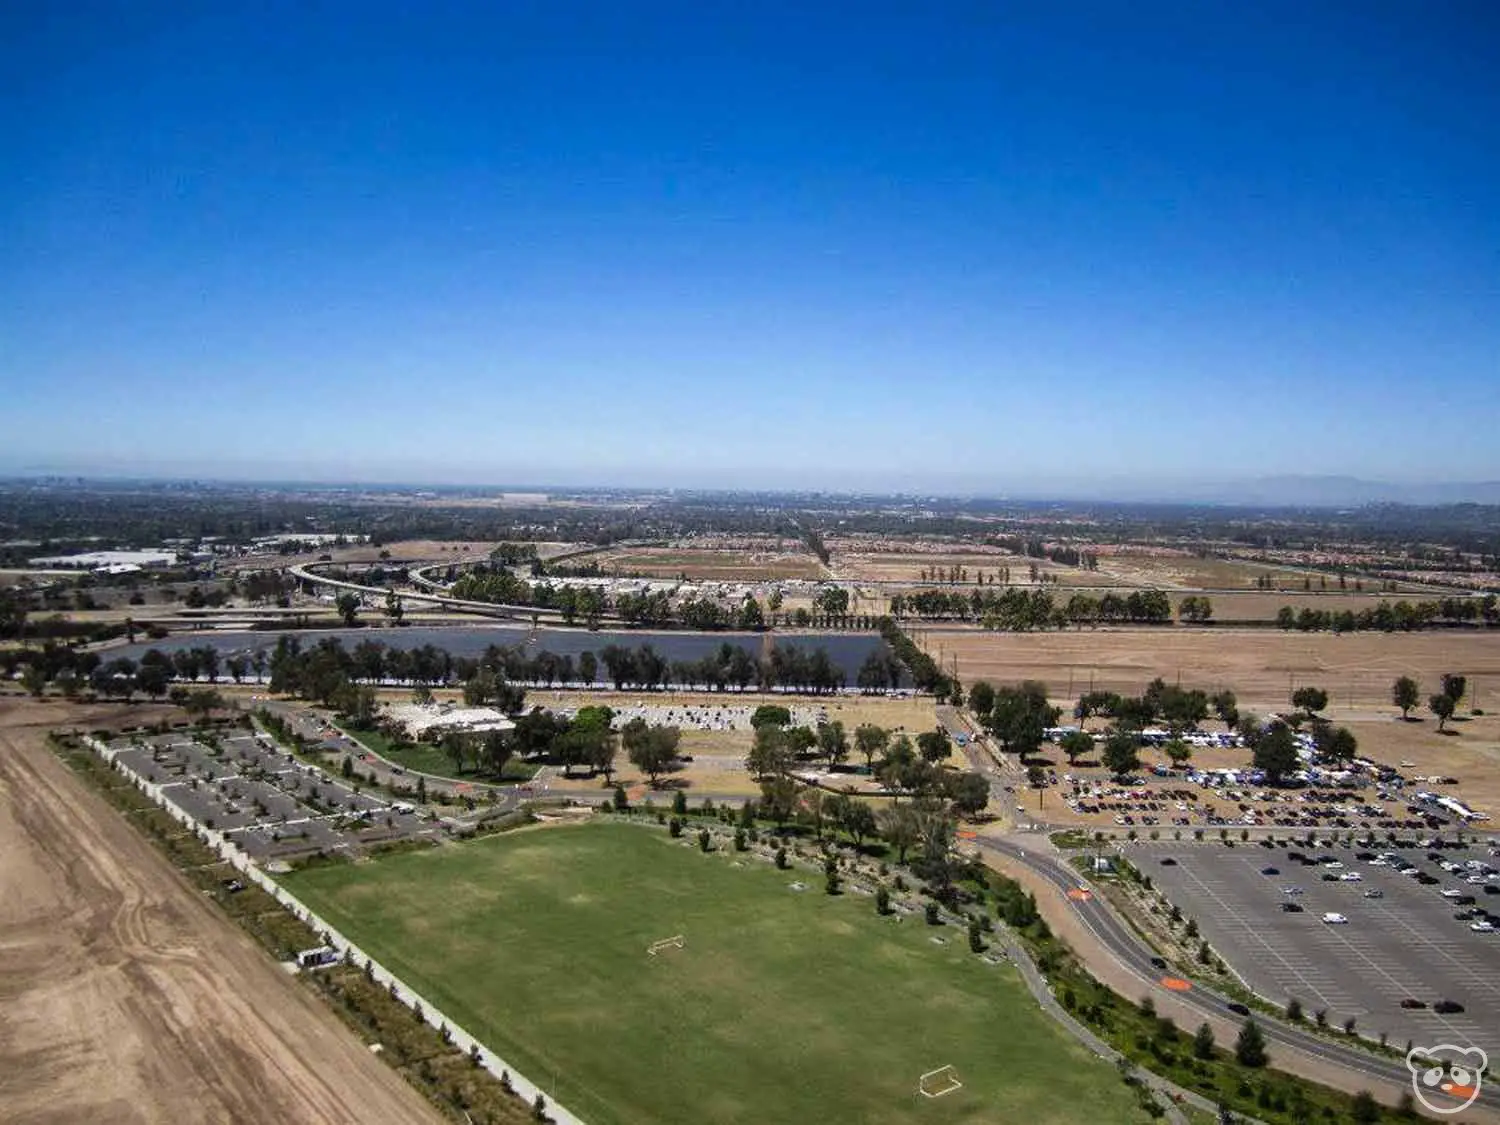 View of the city of Irvine from the sky.